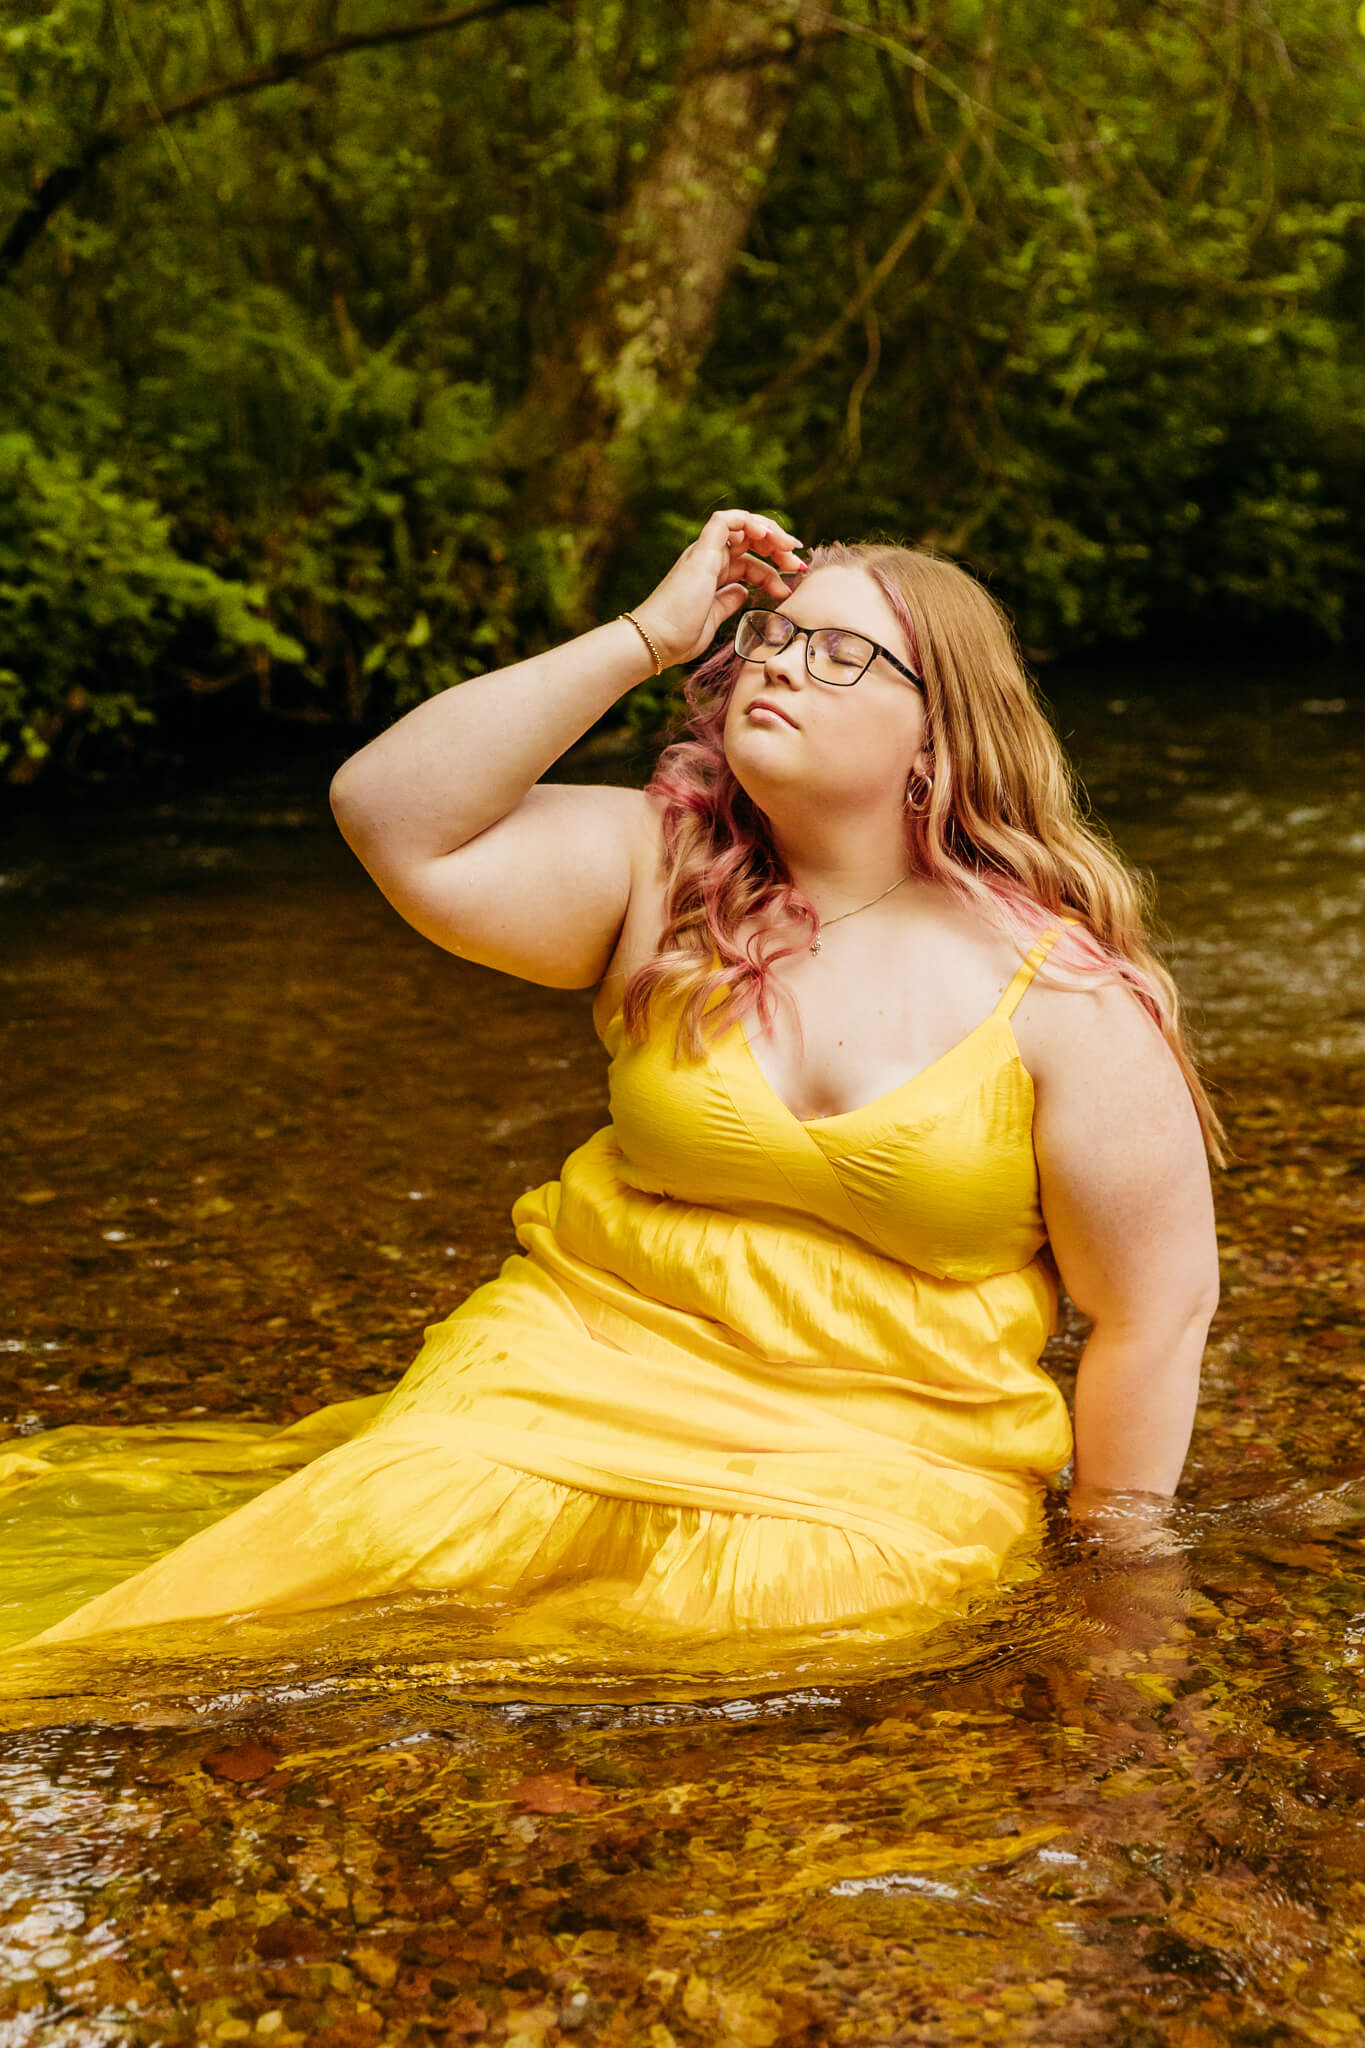 high school girl sitting in a river creek in a yellow dress for senior photos